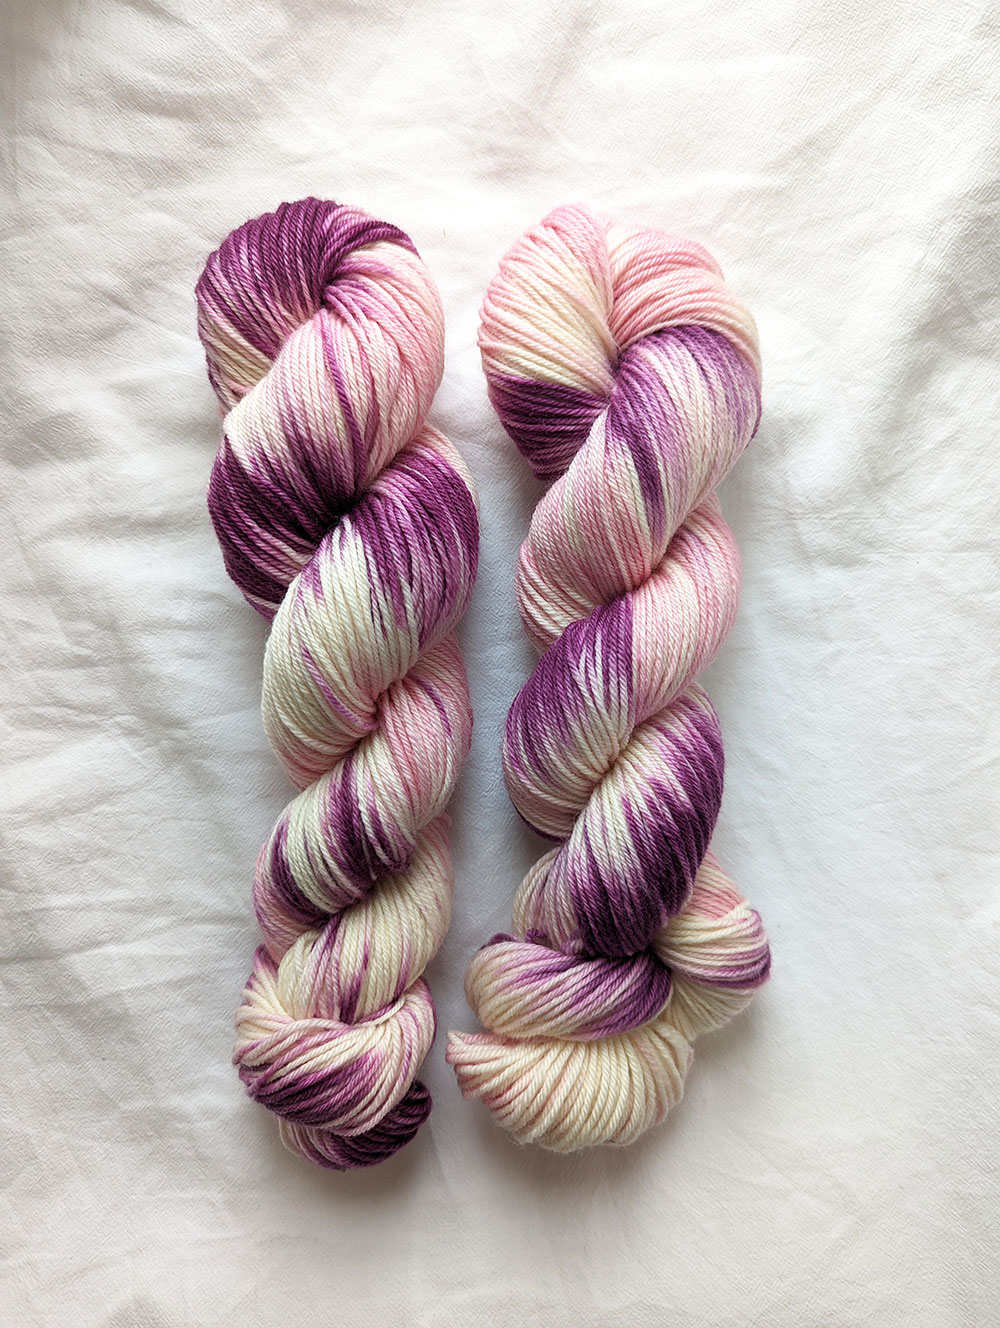 001 - DK - Hand dyed yarn - The Old Horizon